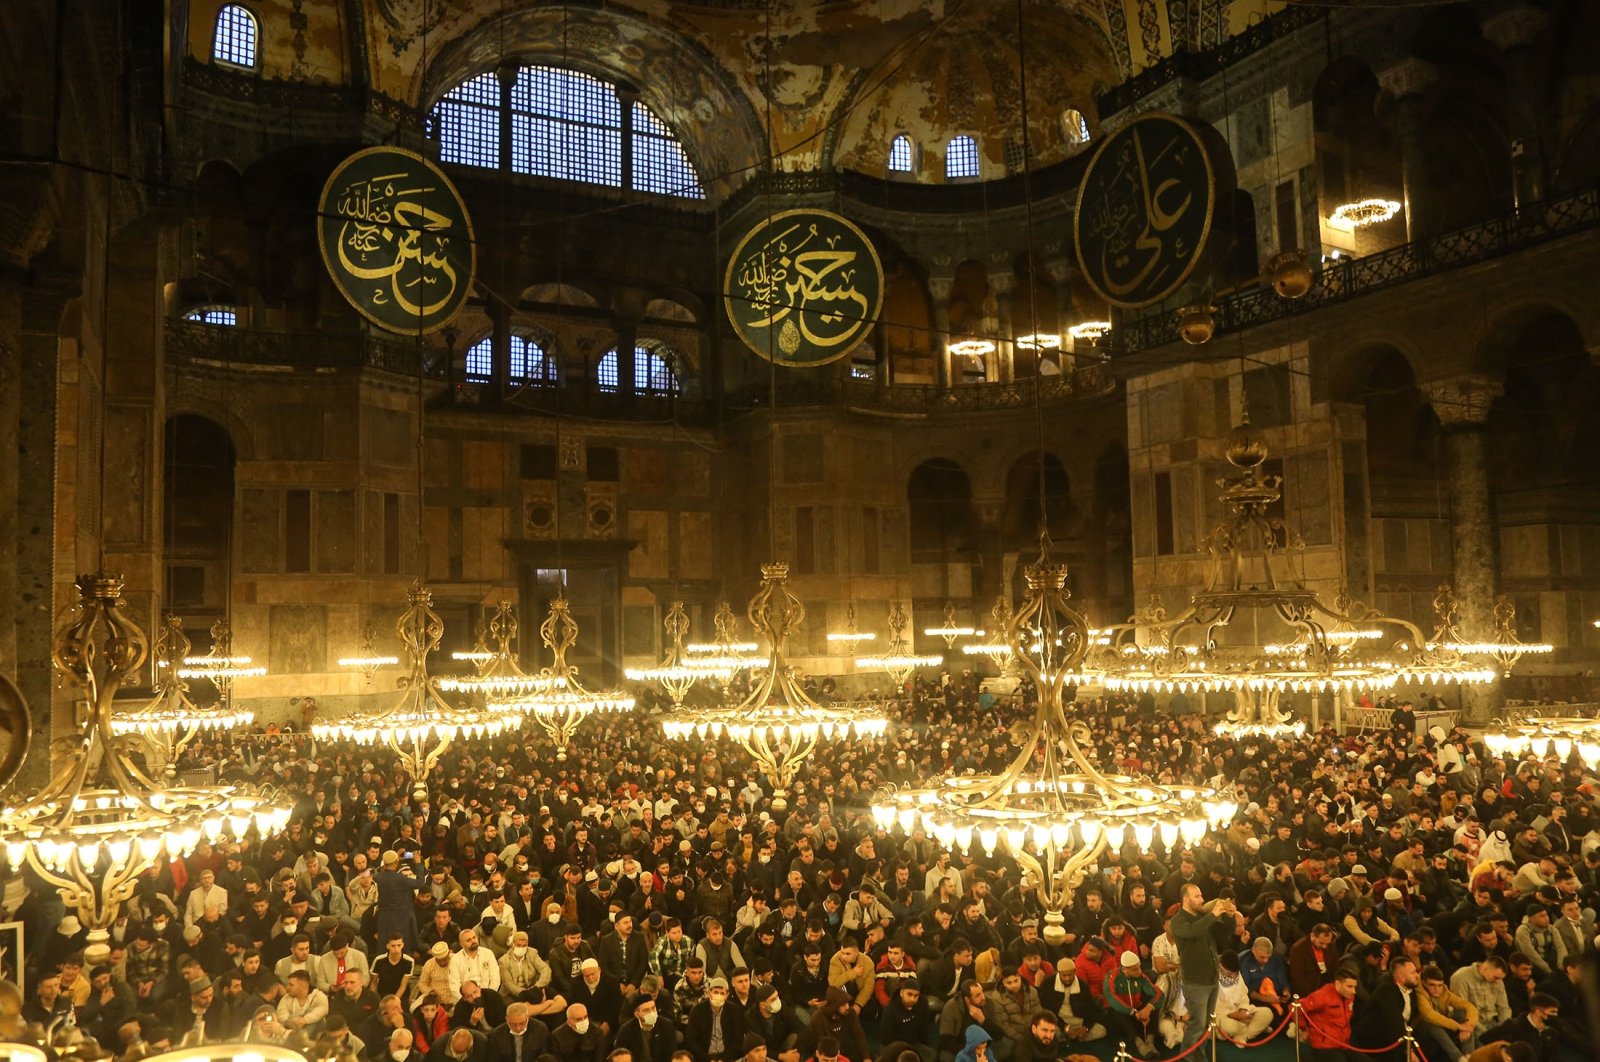 Muslims gather for Eid al-Fitr prayers at Hagia Sophia Grand Mosque, in Istanbul, Türkiye, May 2, 2022. (Getty Images Photo)